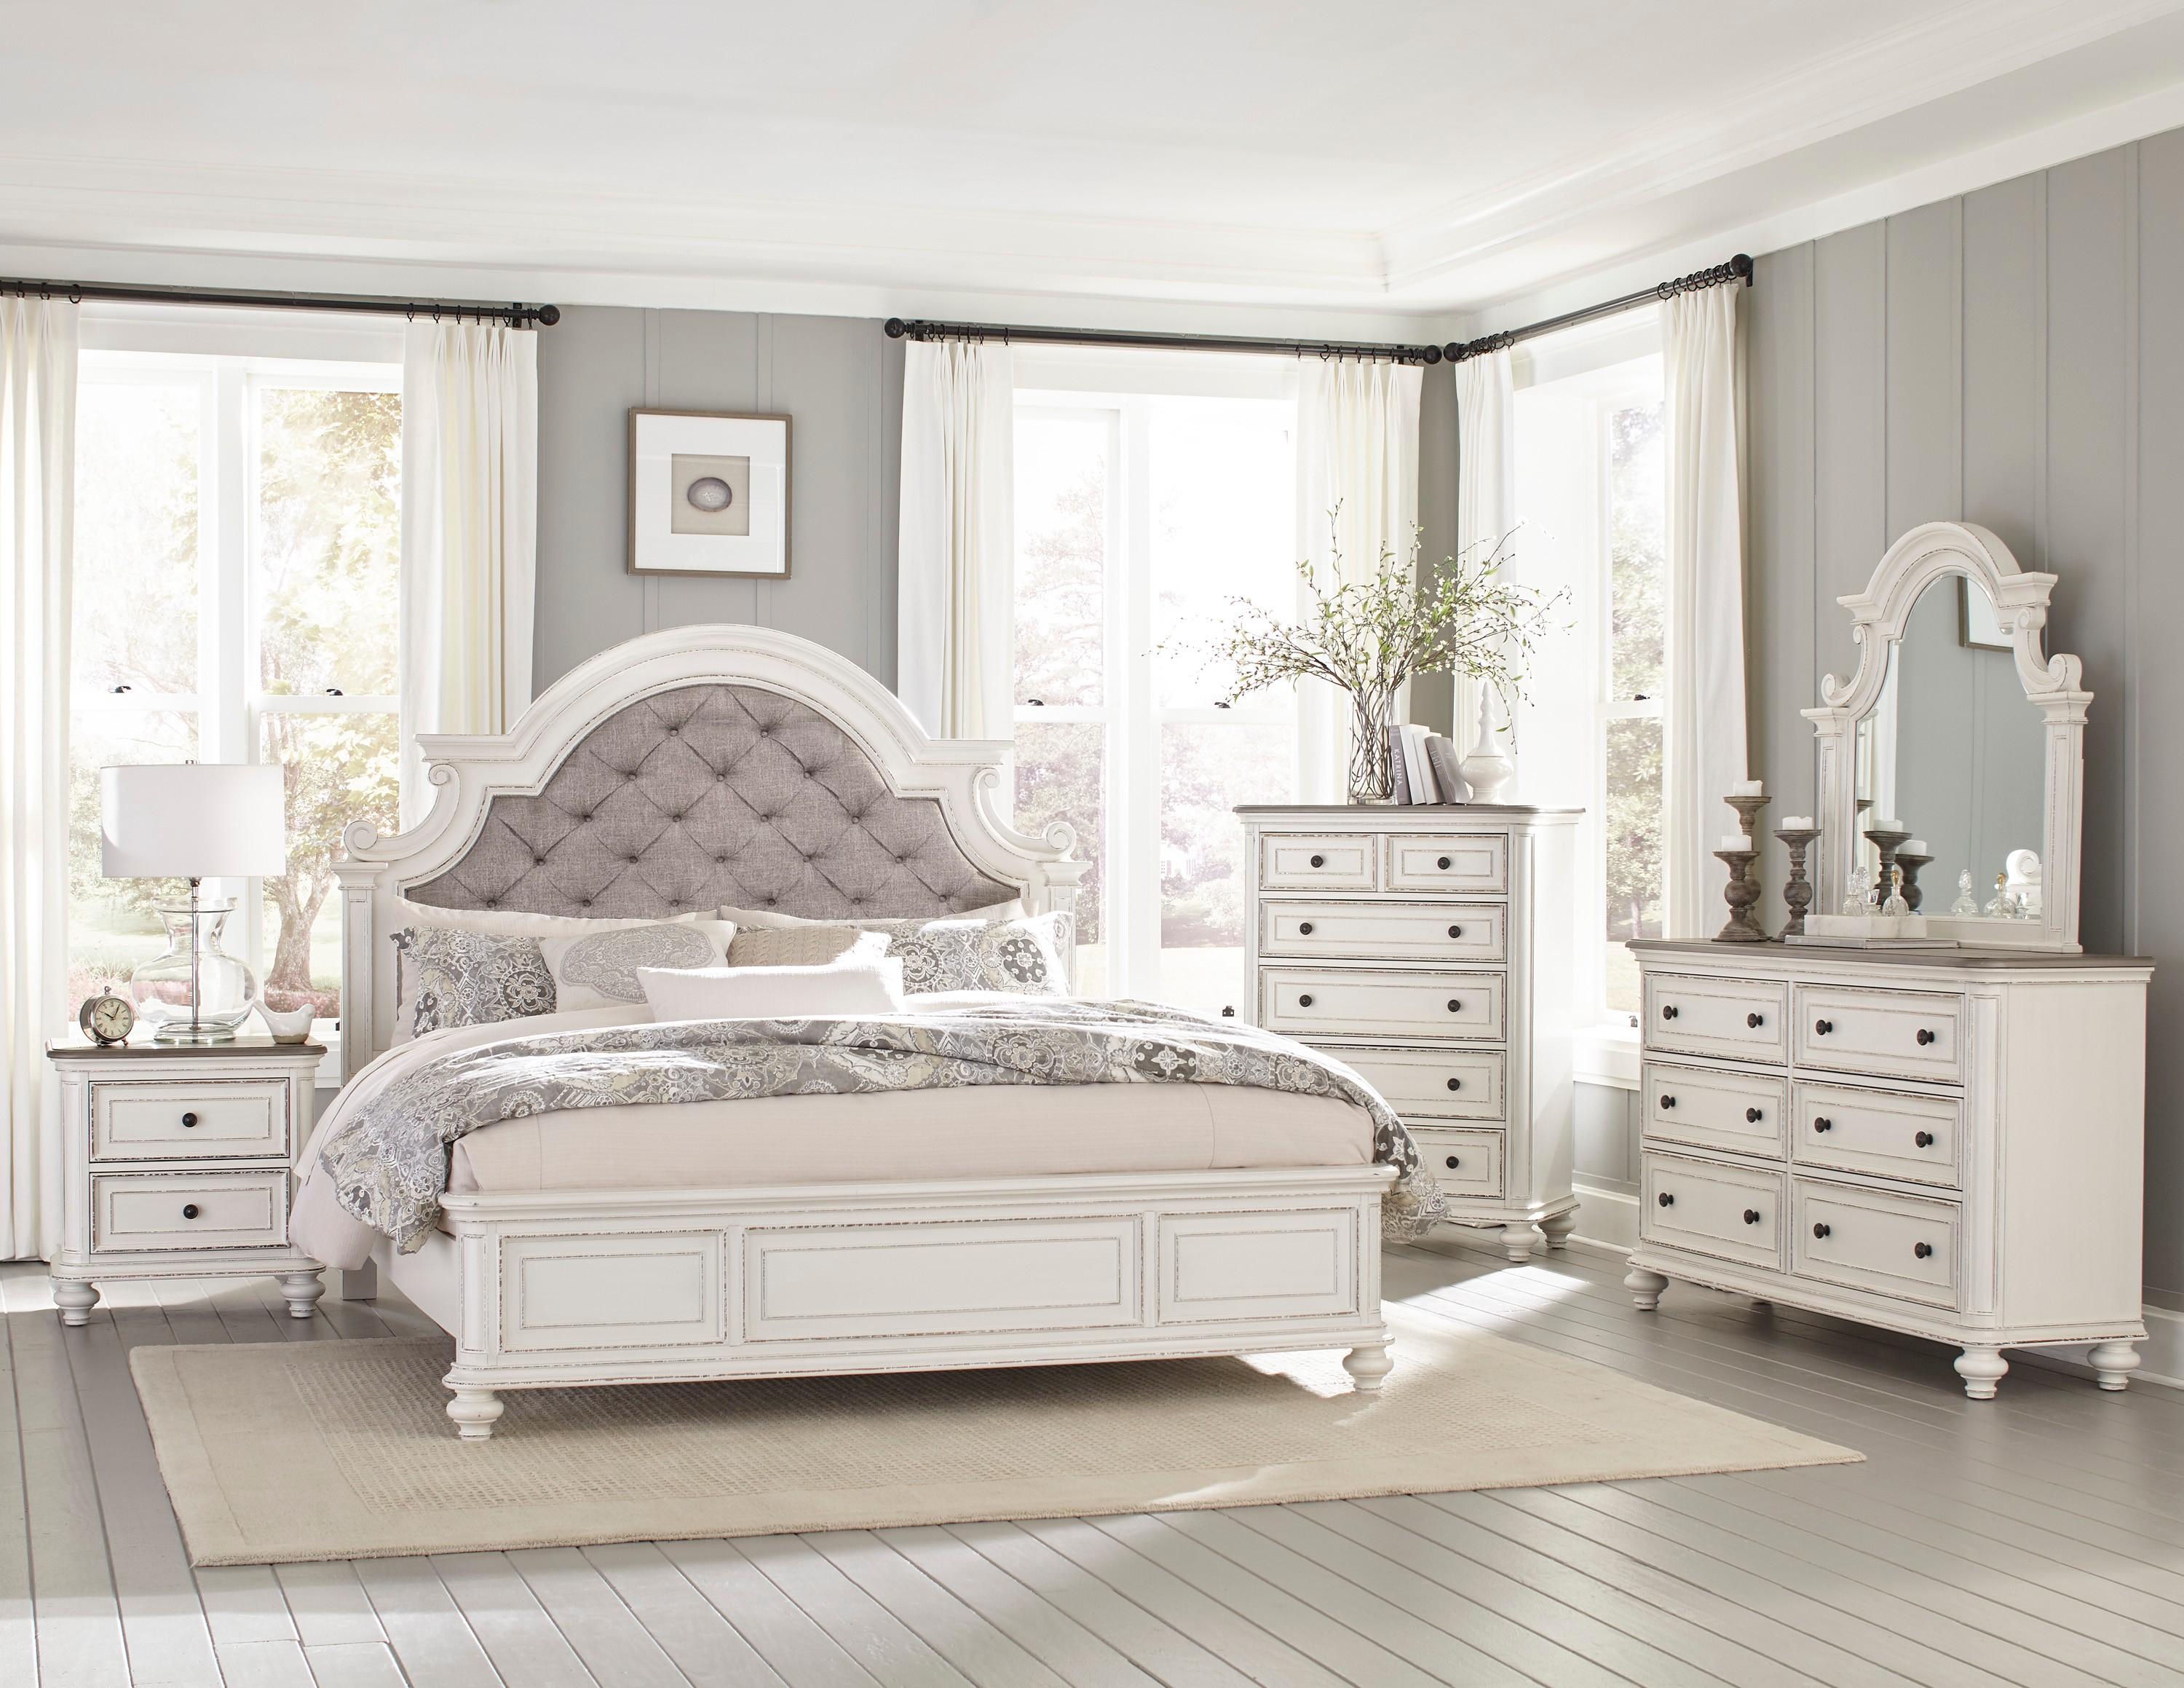 Classic Bedroom Set 1624KW-1CK-6PC Baylesford 1624KW-1CK-6PC in Antique White Polyester